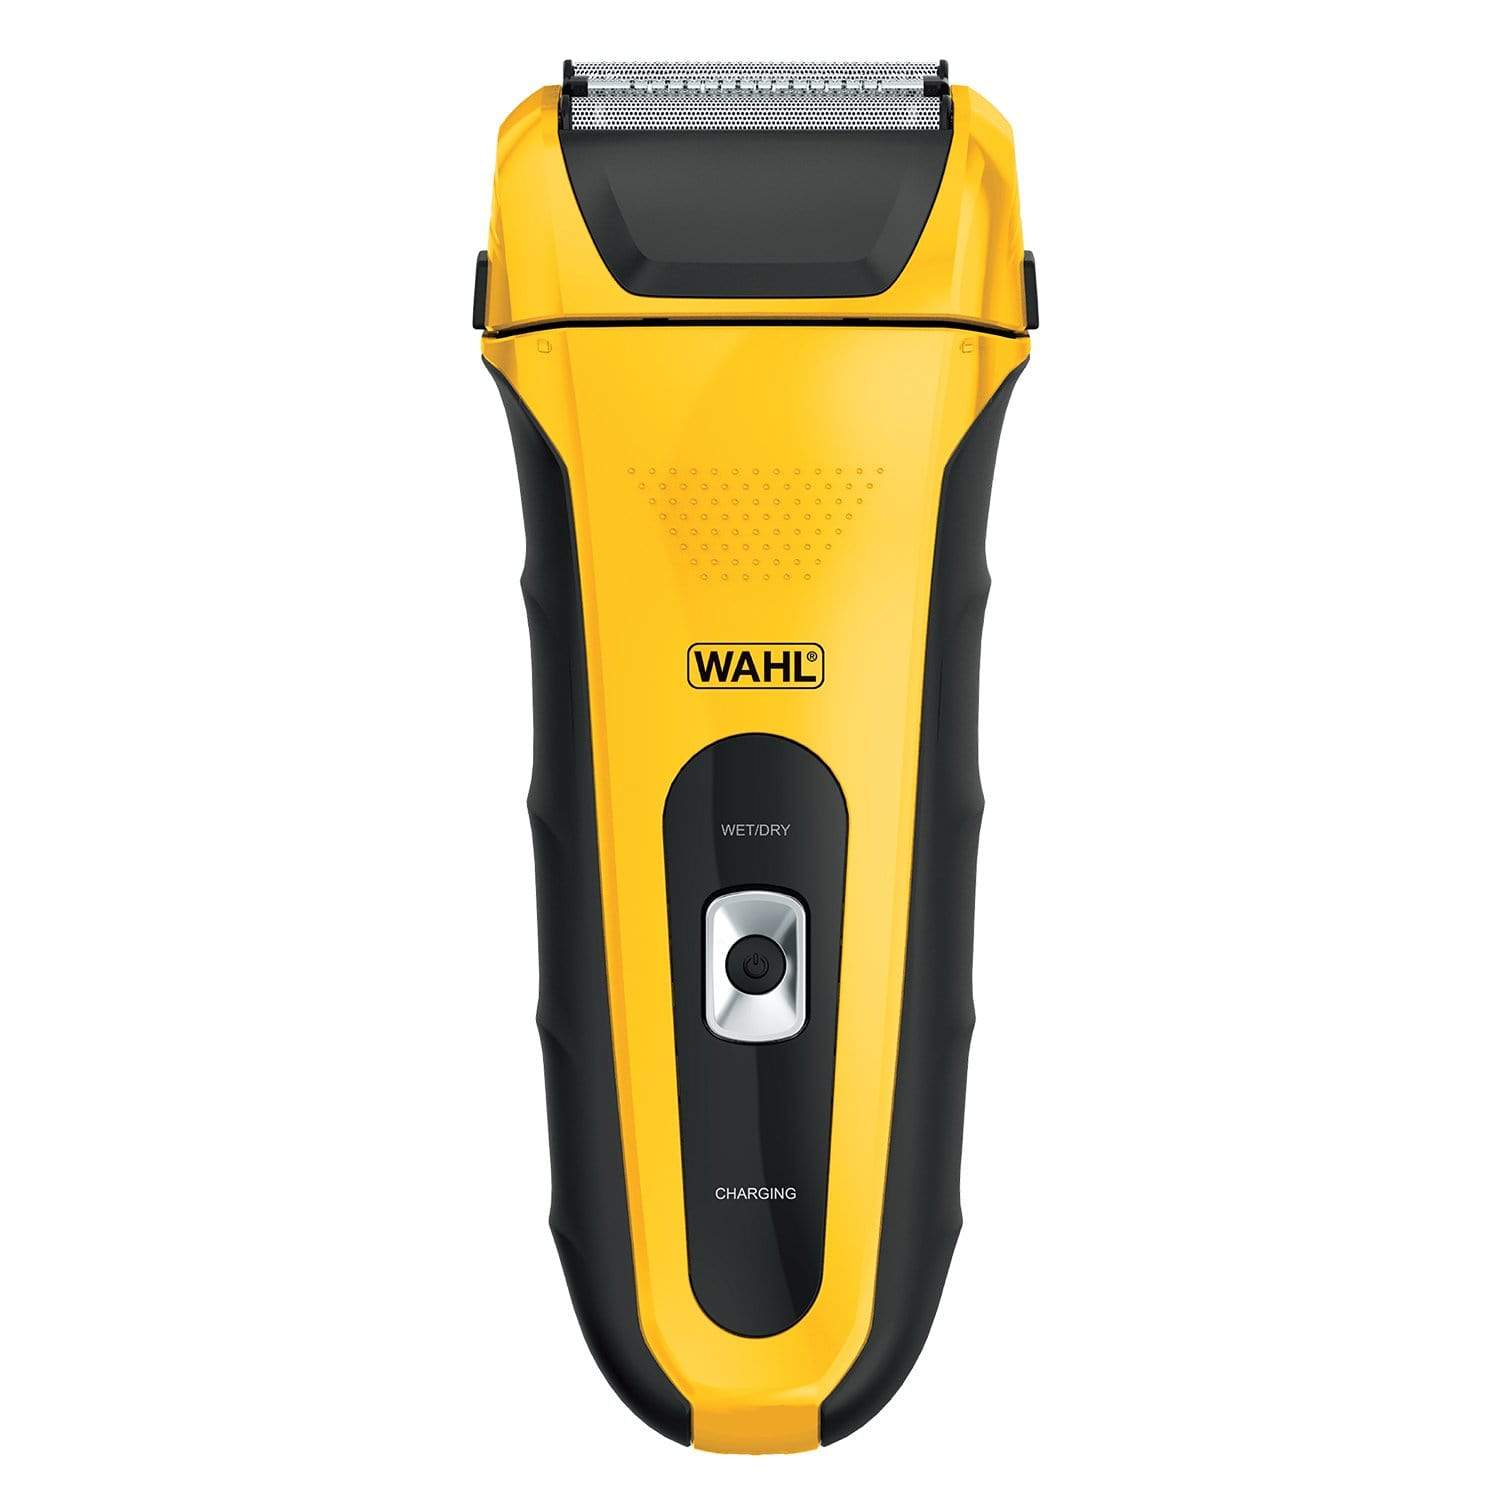 Wahl Life Proof Shaver